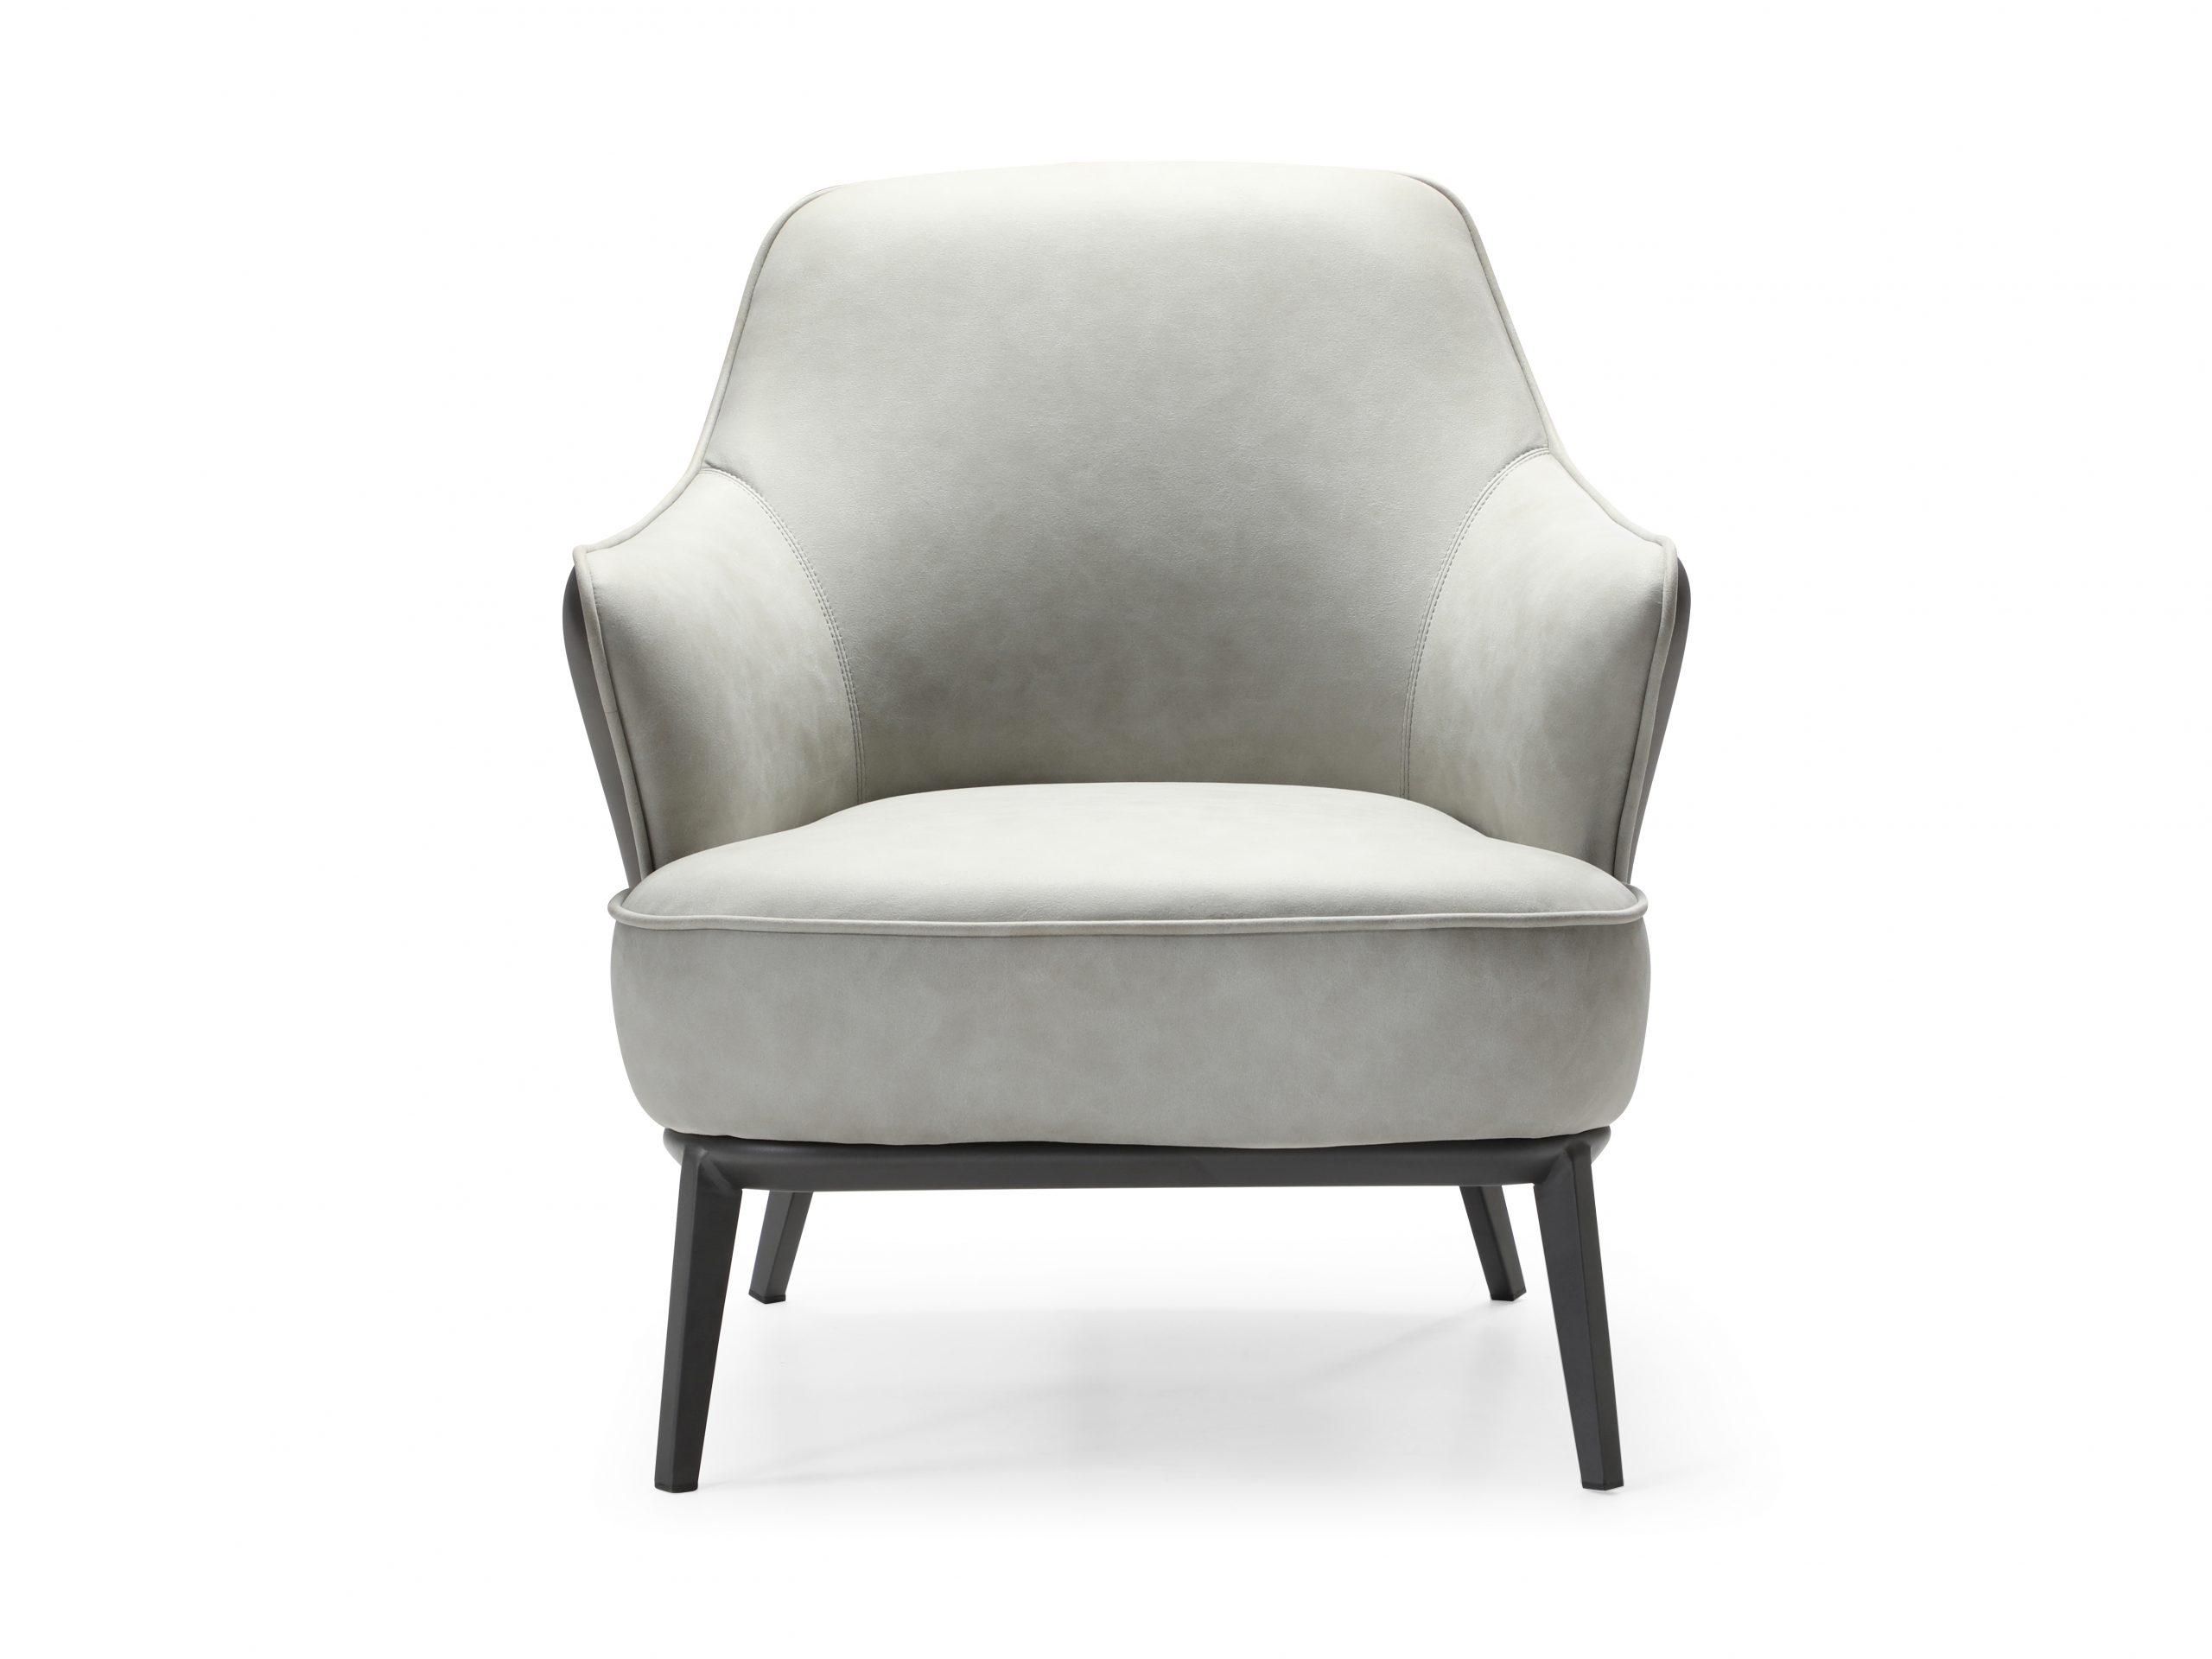 Modern Accent Chair CH1705FP-LGRY/DGRY Sunizona CH1705FP-LGRY/DGRY in Light Gray Fabric